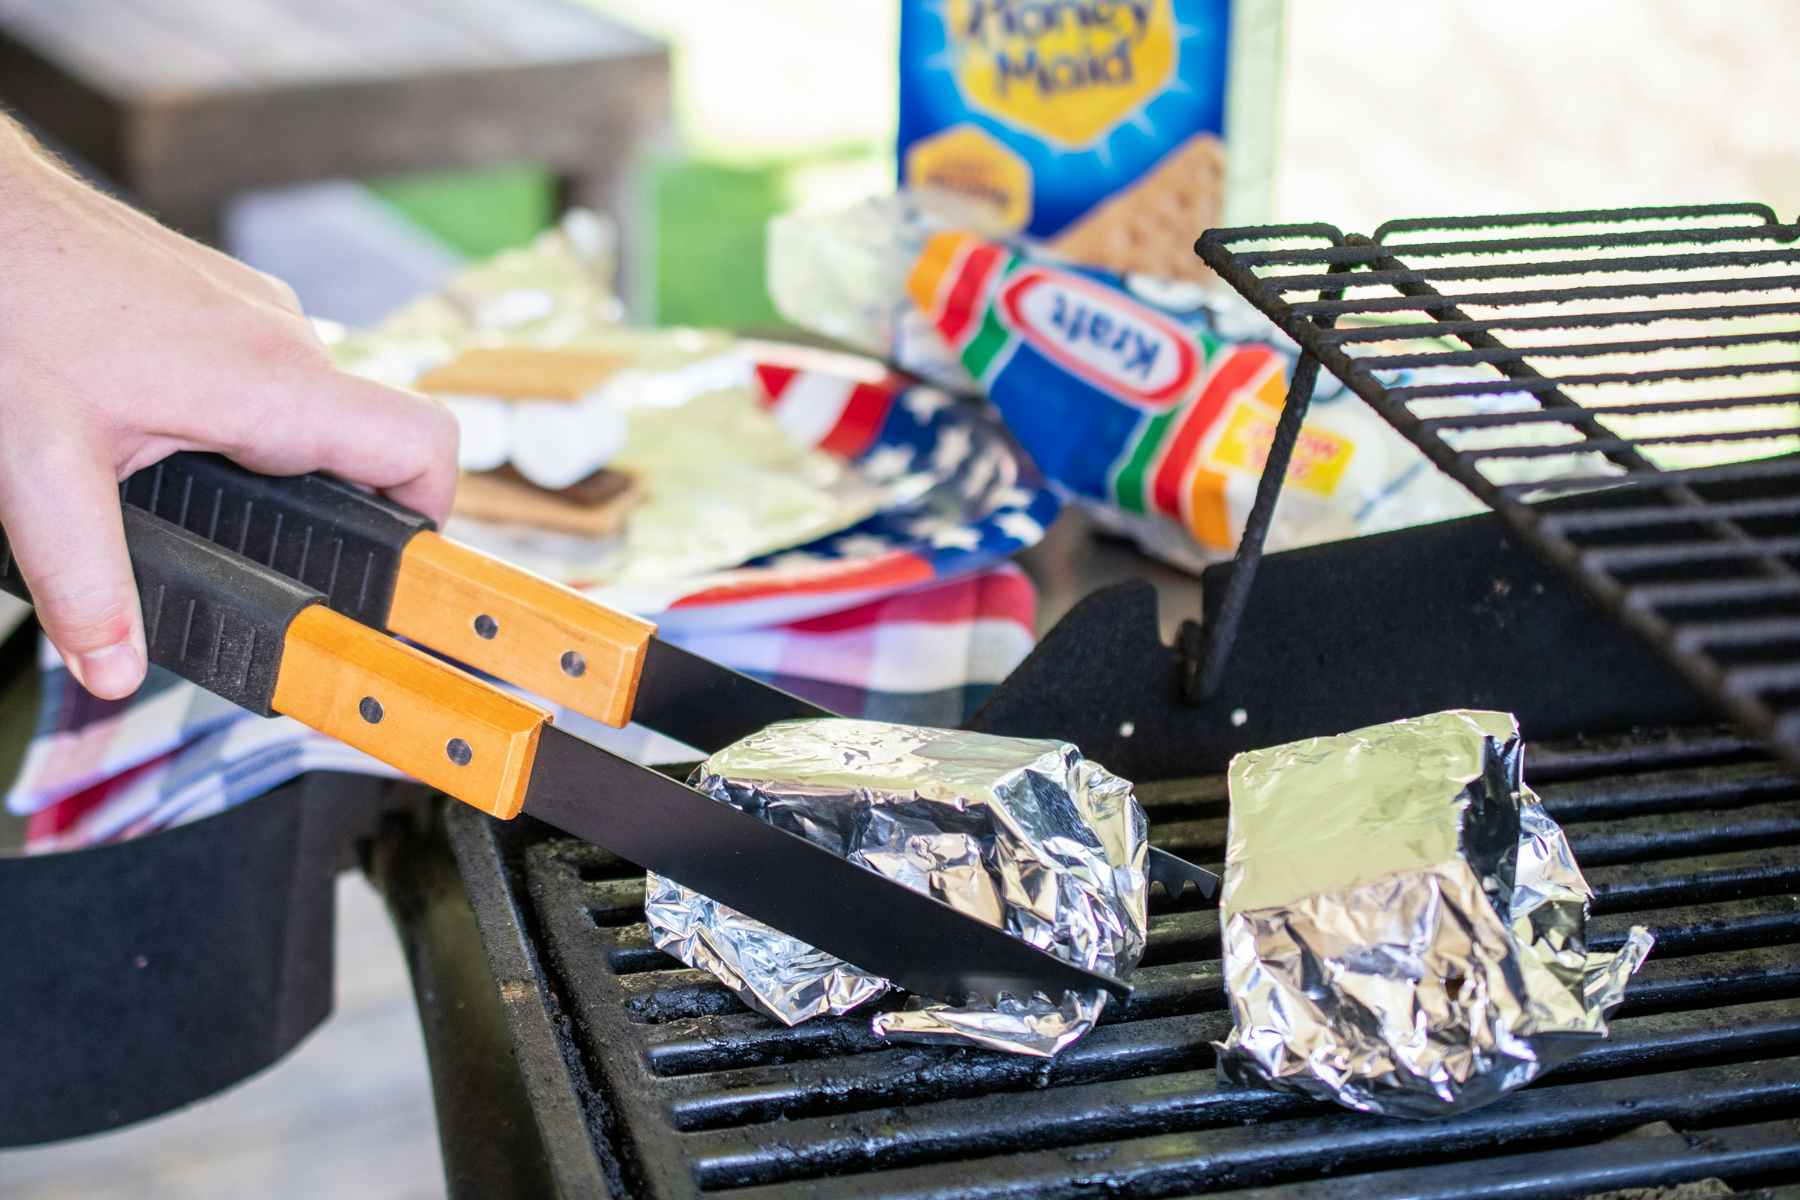 A person removing a tinfoil wrapped smore from a bbq